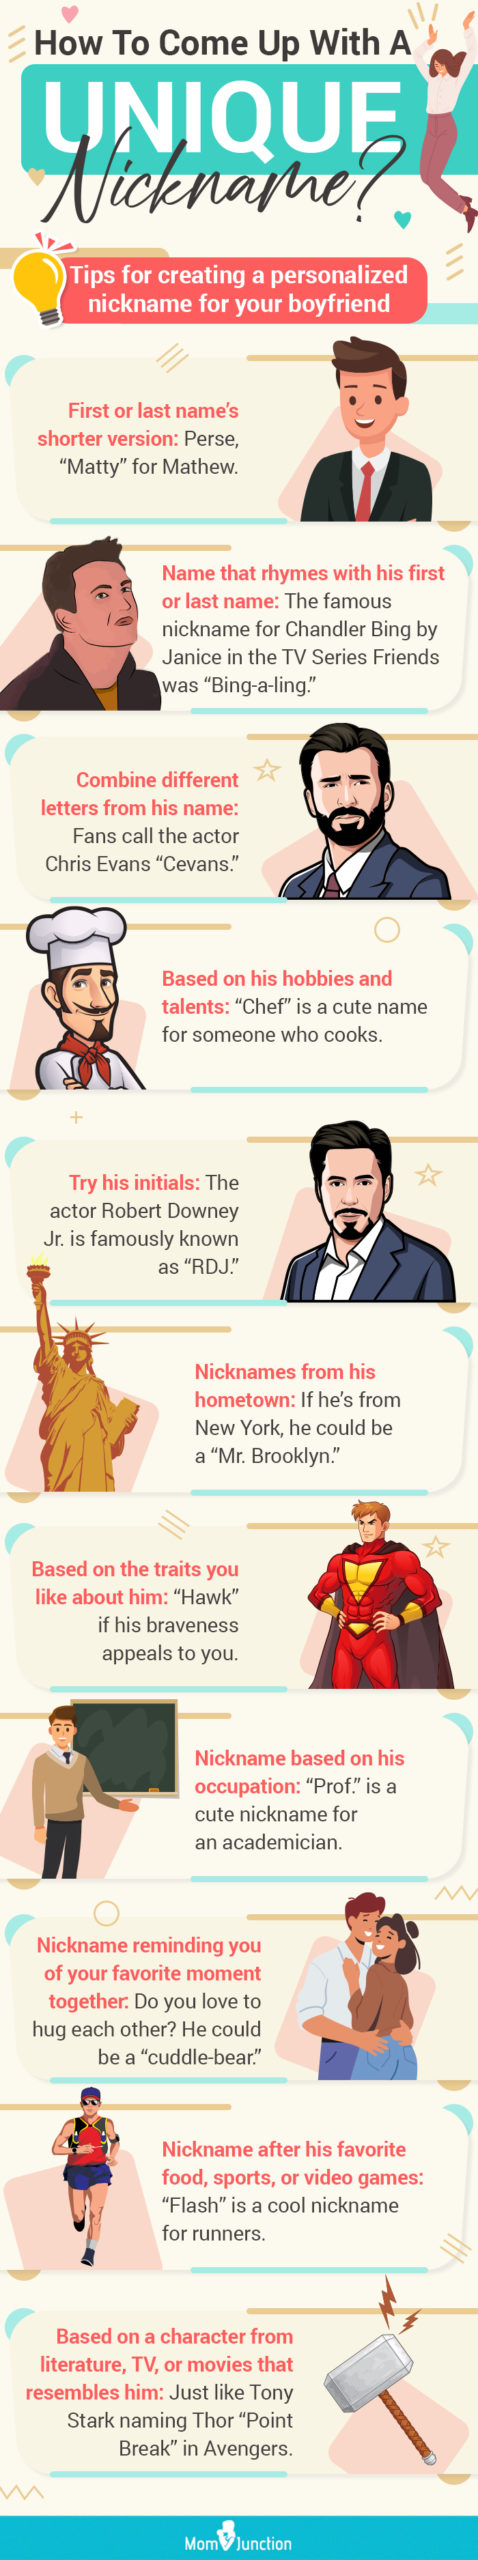 how to come up with a unique nickname (infographic)